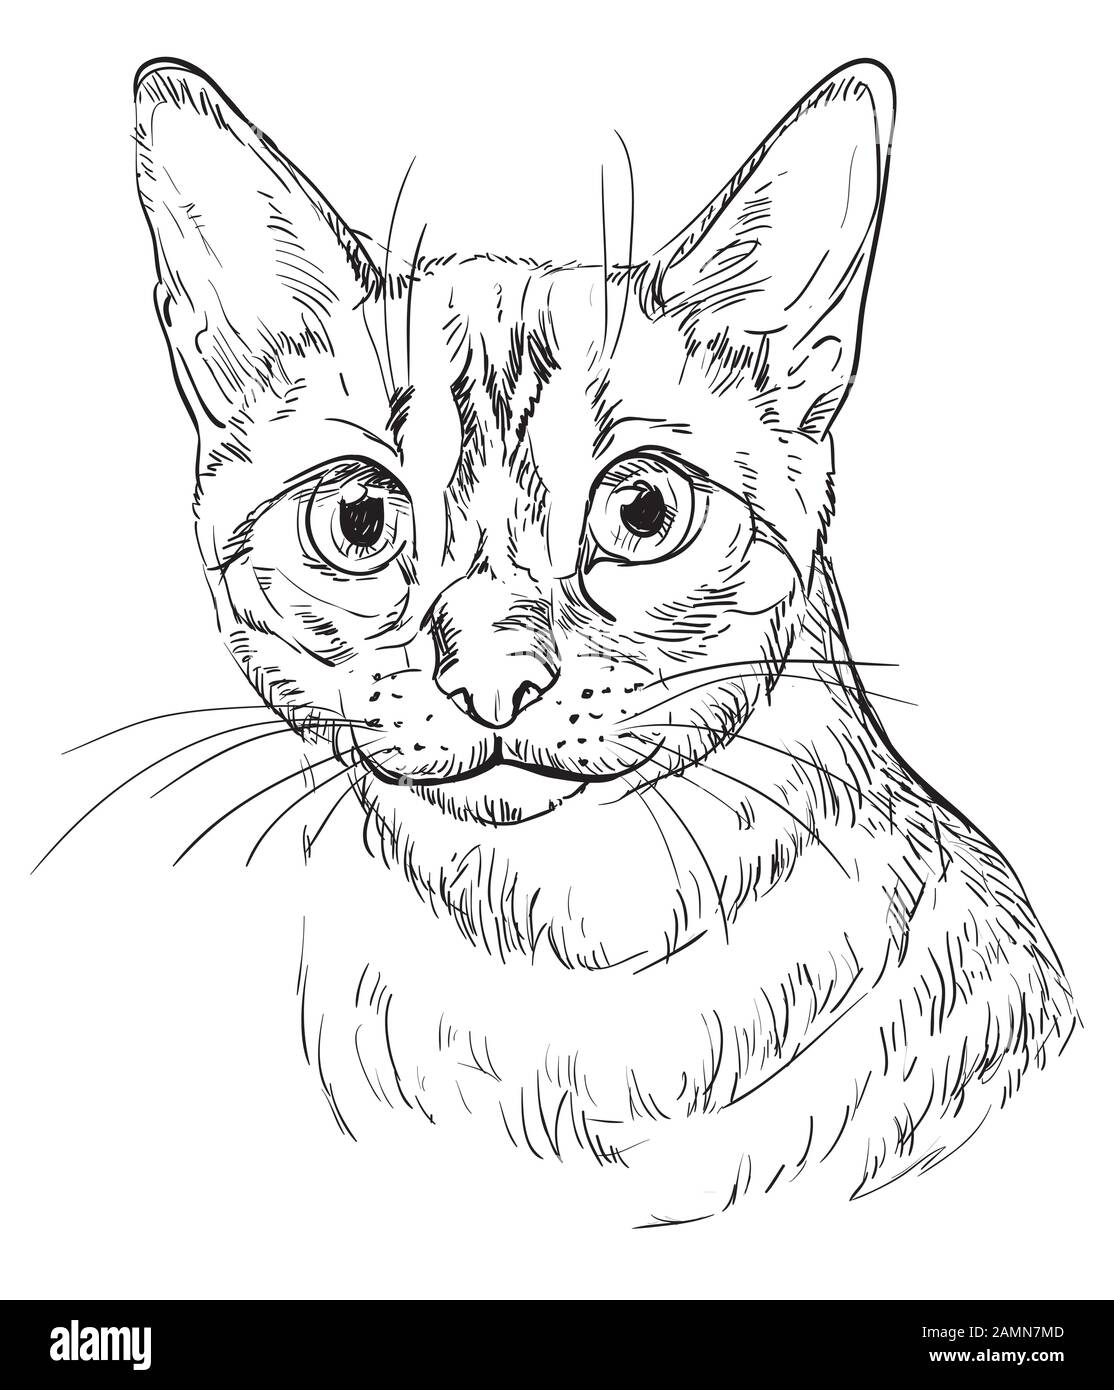 How to draw a Bengal cat step by step - Cat drawing easy for beginners